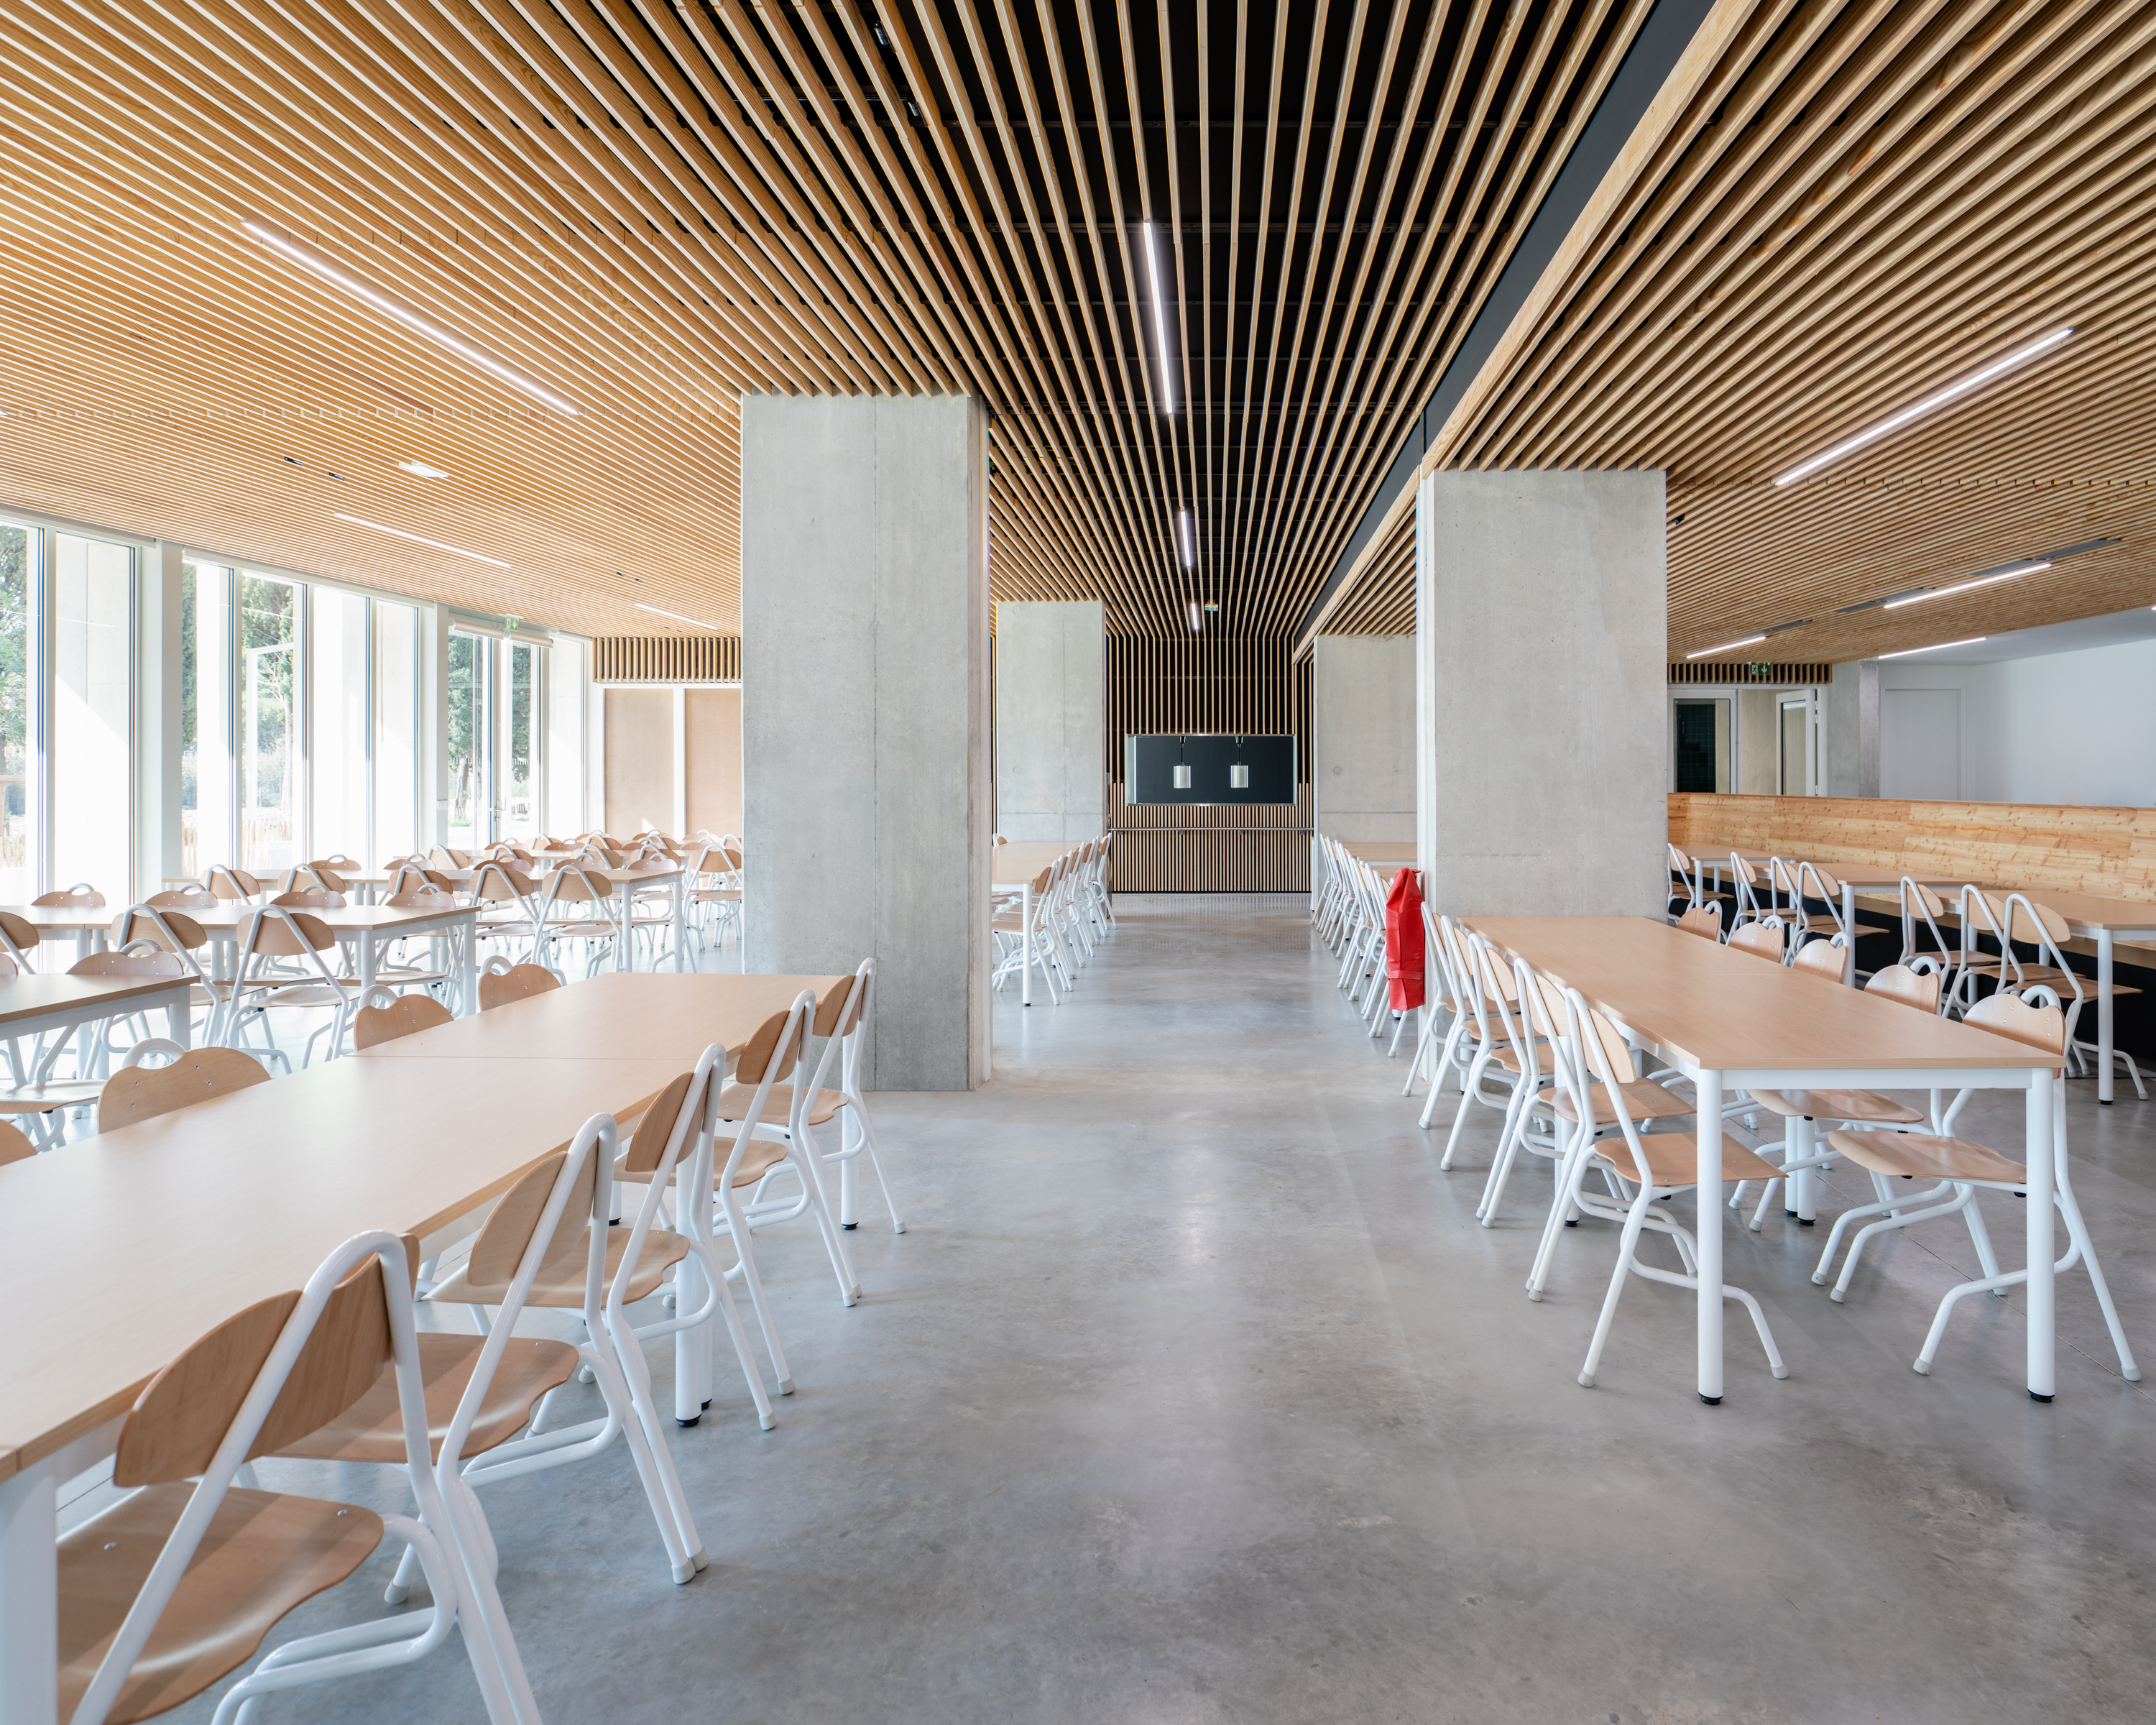 Laudescher’s wood solutions perfect the ethereal and rhythmic architectural composition of the Châteaurenard High School-4